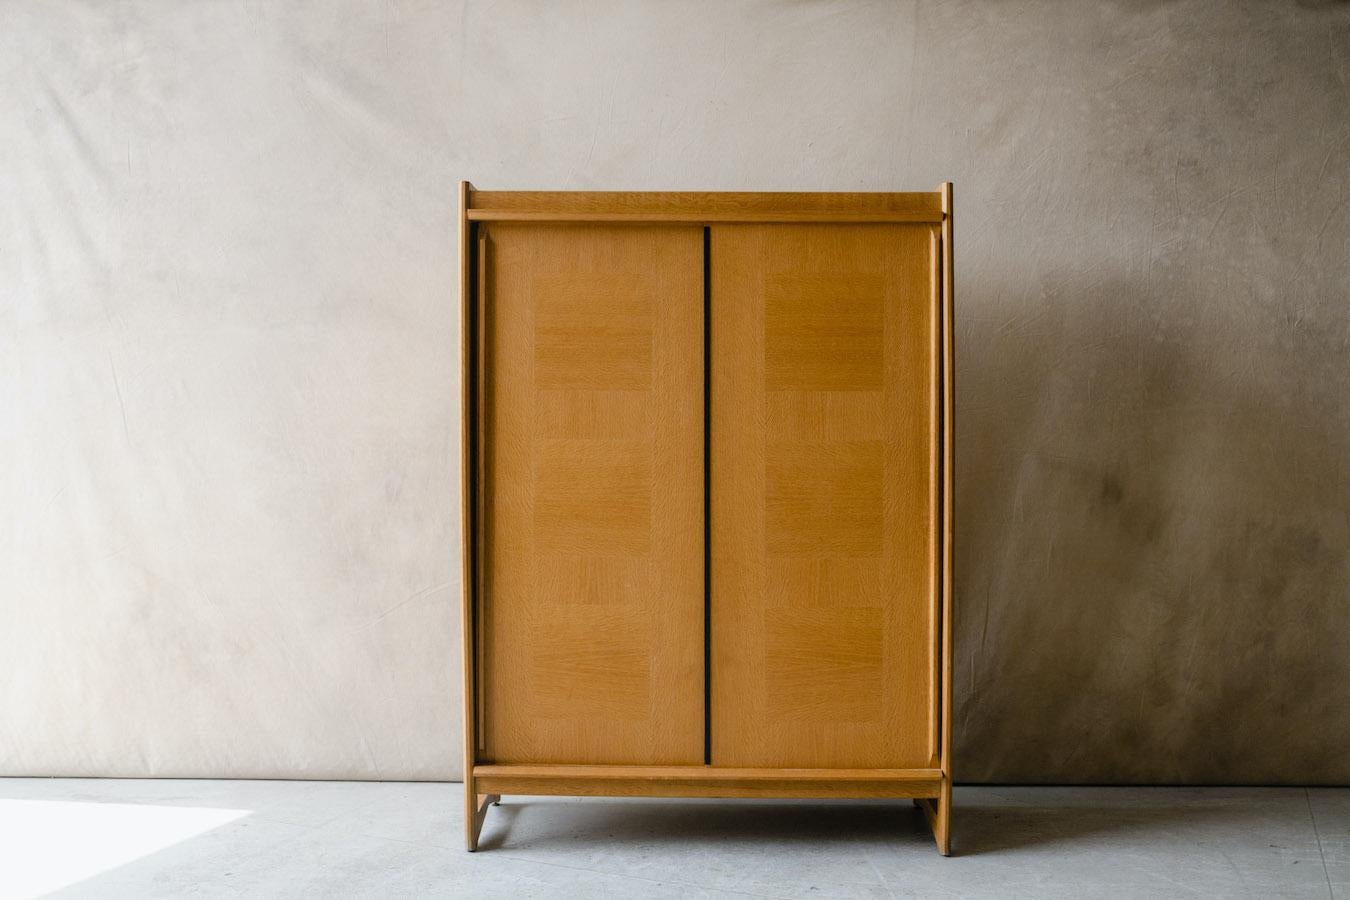 Vintage Guillerme Et Chambron cabinet from France, Circa 1960. Solid oak construction with two sliding doors and adjustable shelves. Very good condition with light wear and use. 

We don't have the time to write an exhausting description on each of